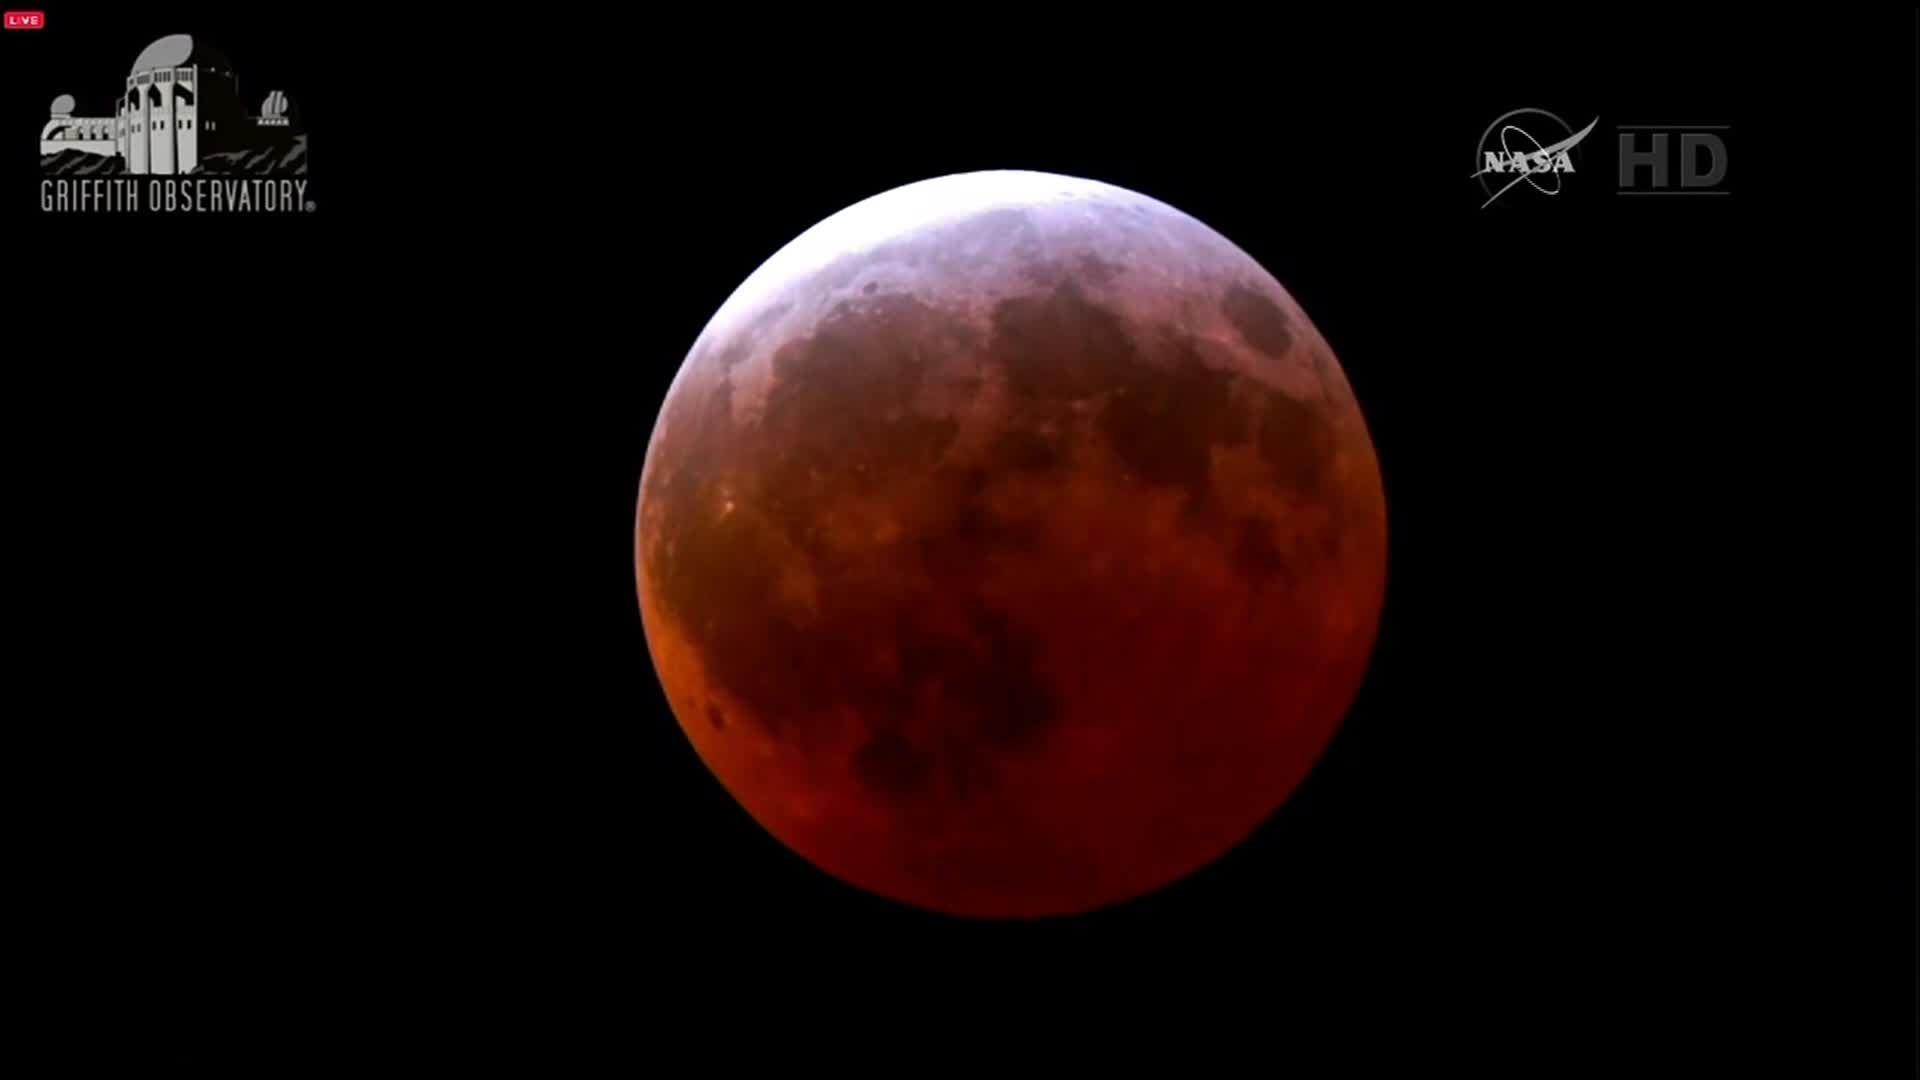 Super blue blood moon to appear on Jan. 31